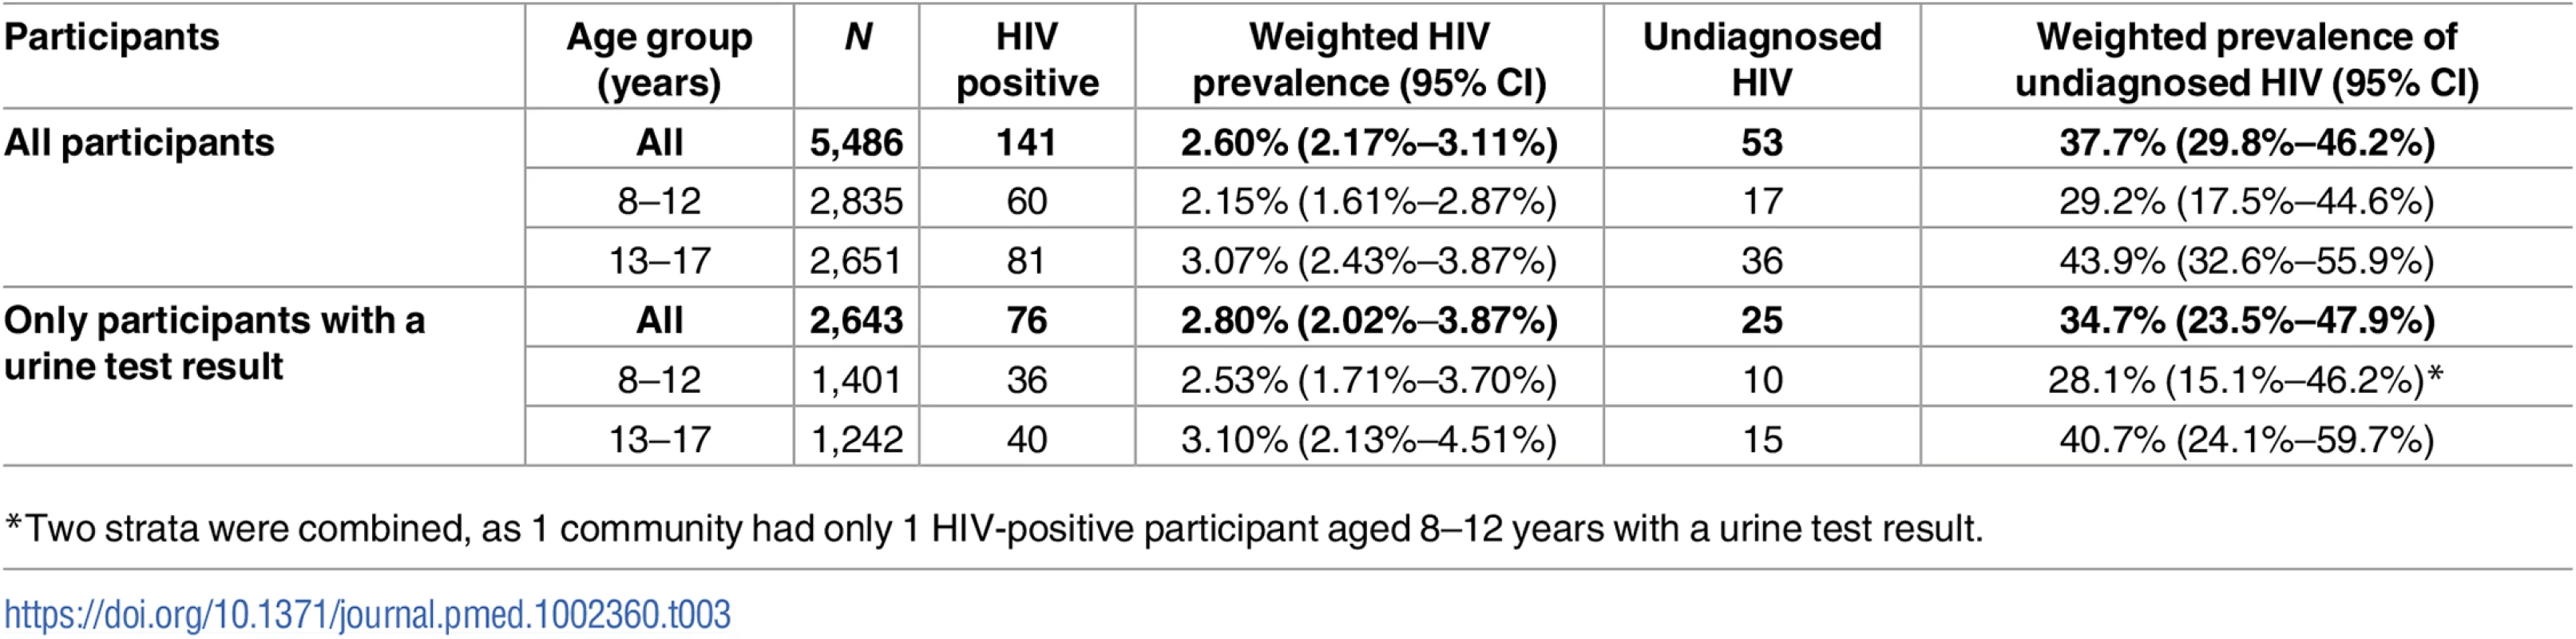 HIV prevalence and proportion of undiagnosed HIV infection.